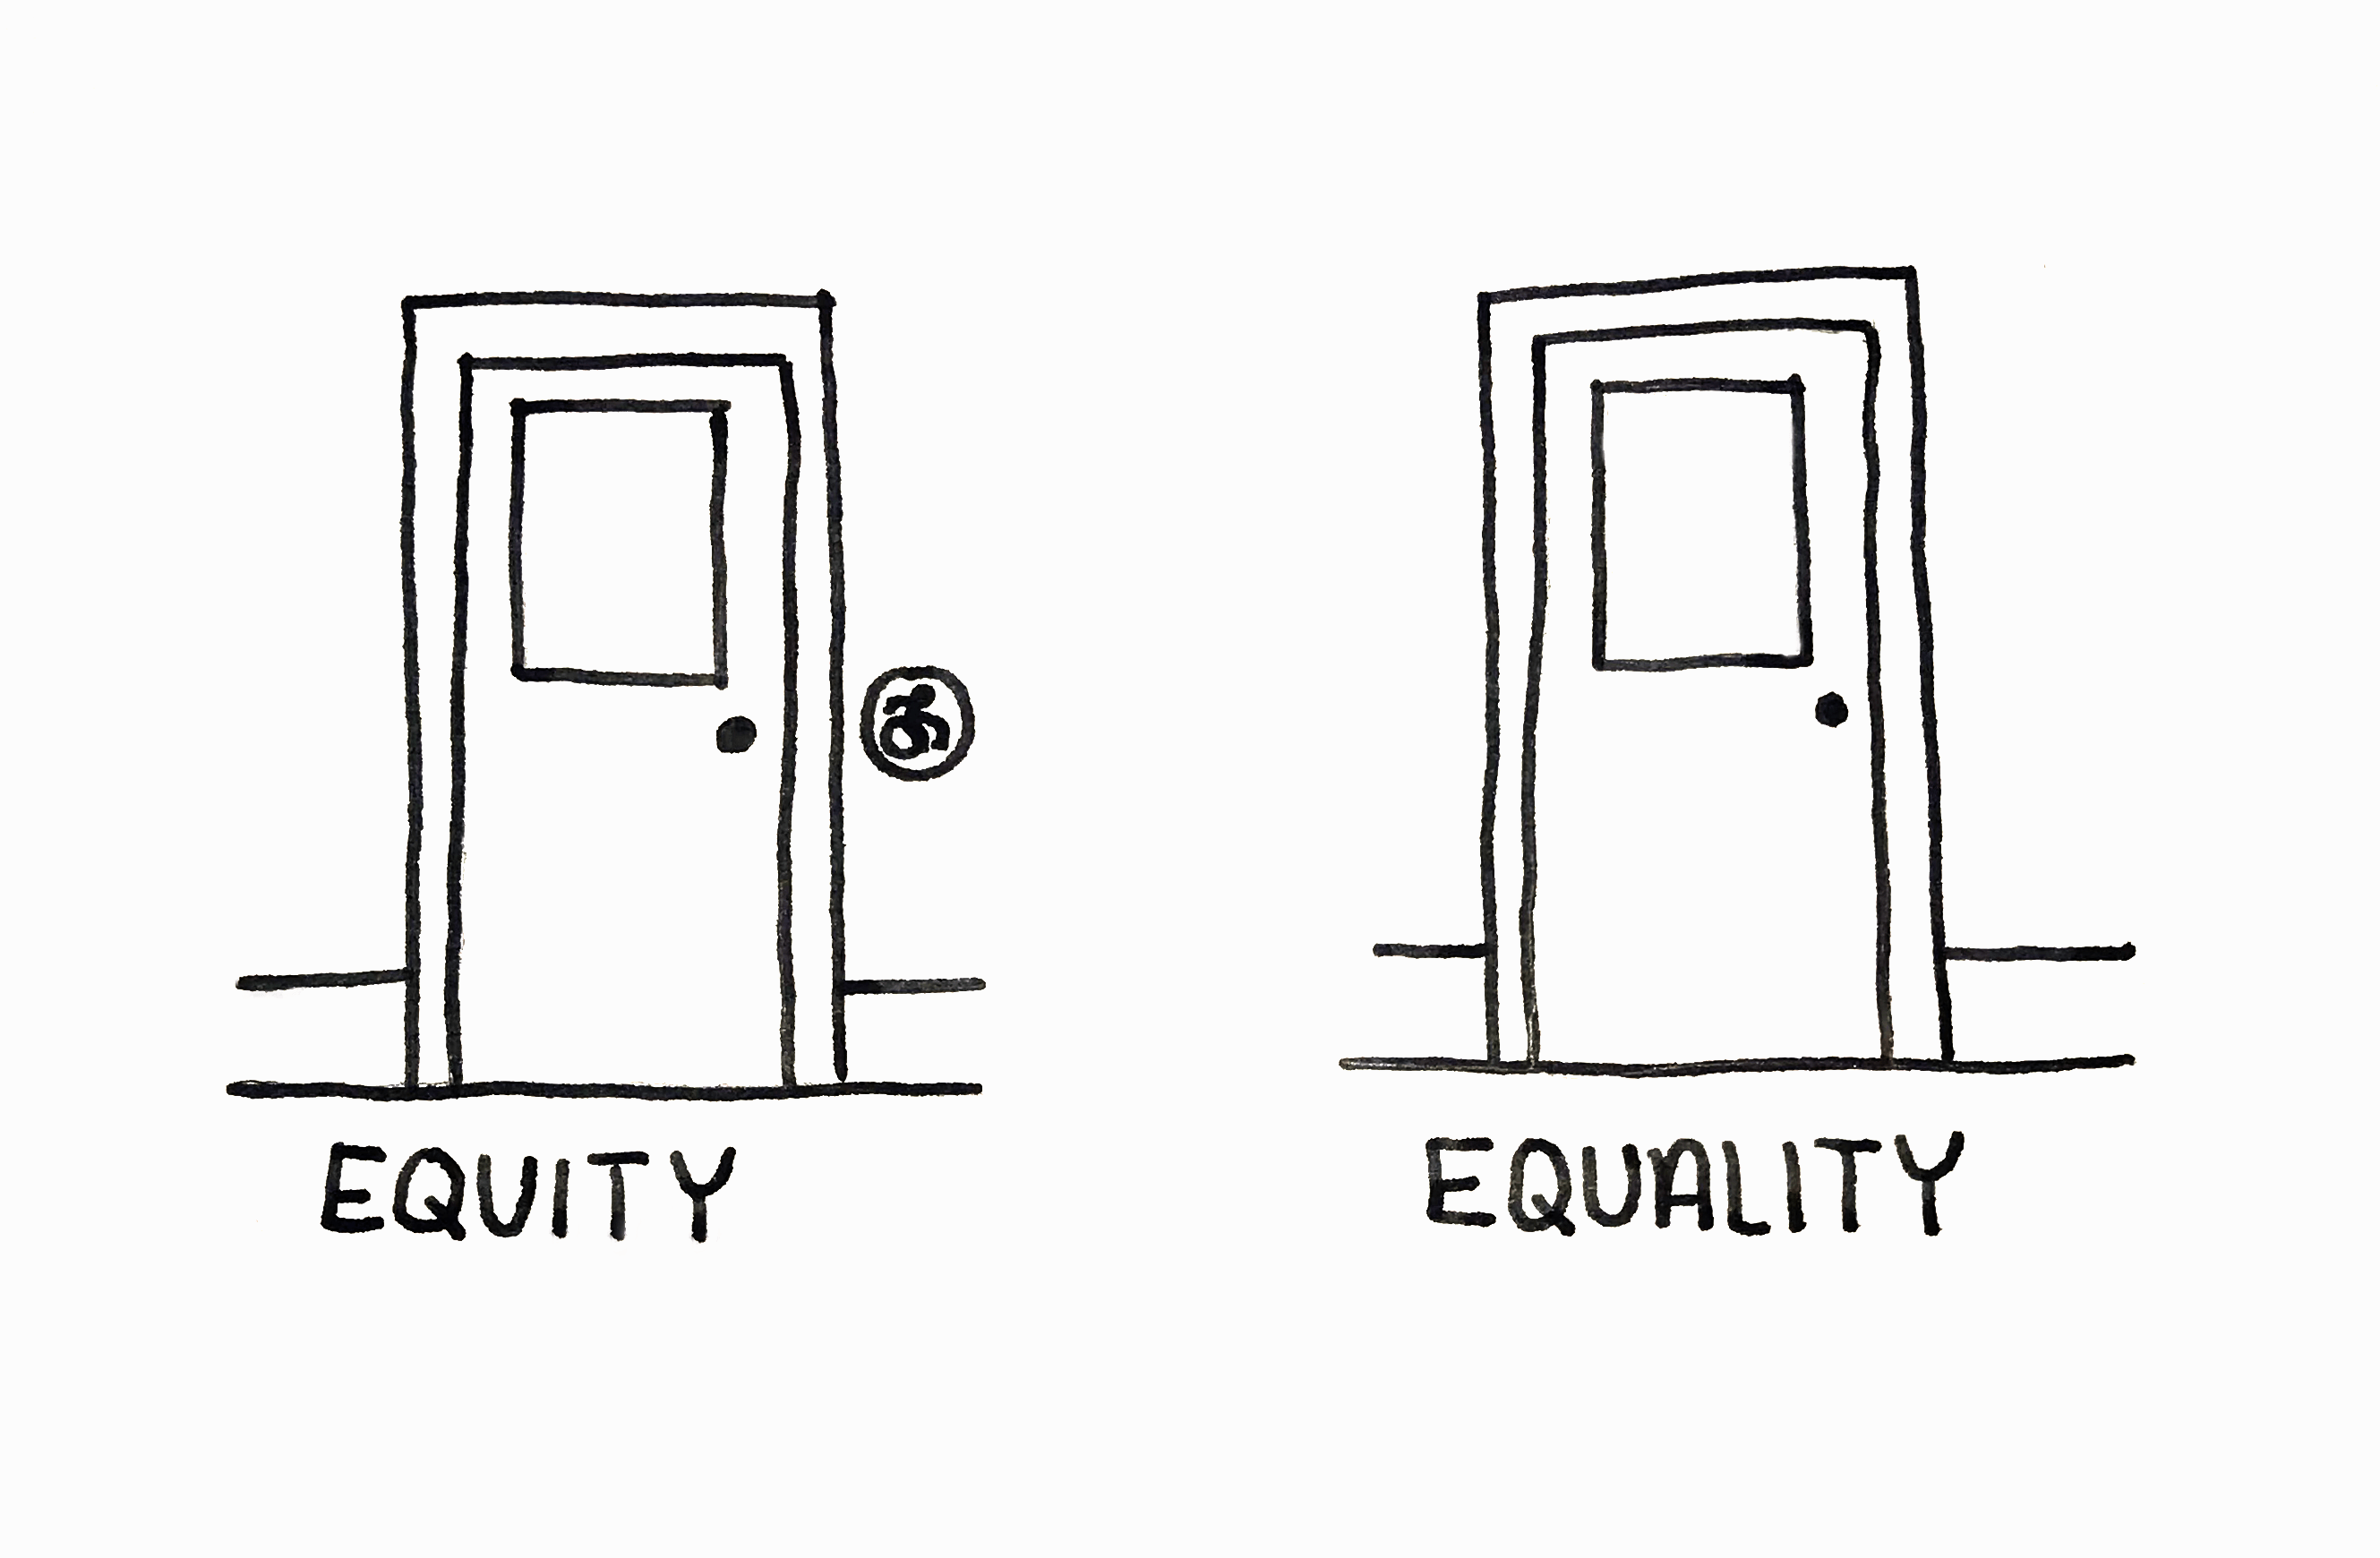 An illustration of two doors: the one on the left has the caption 'Equity' and the one on the right has the caption 'equality'. The left hand door has a button to open the door, the right door does not.